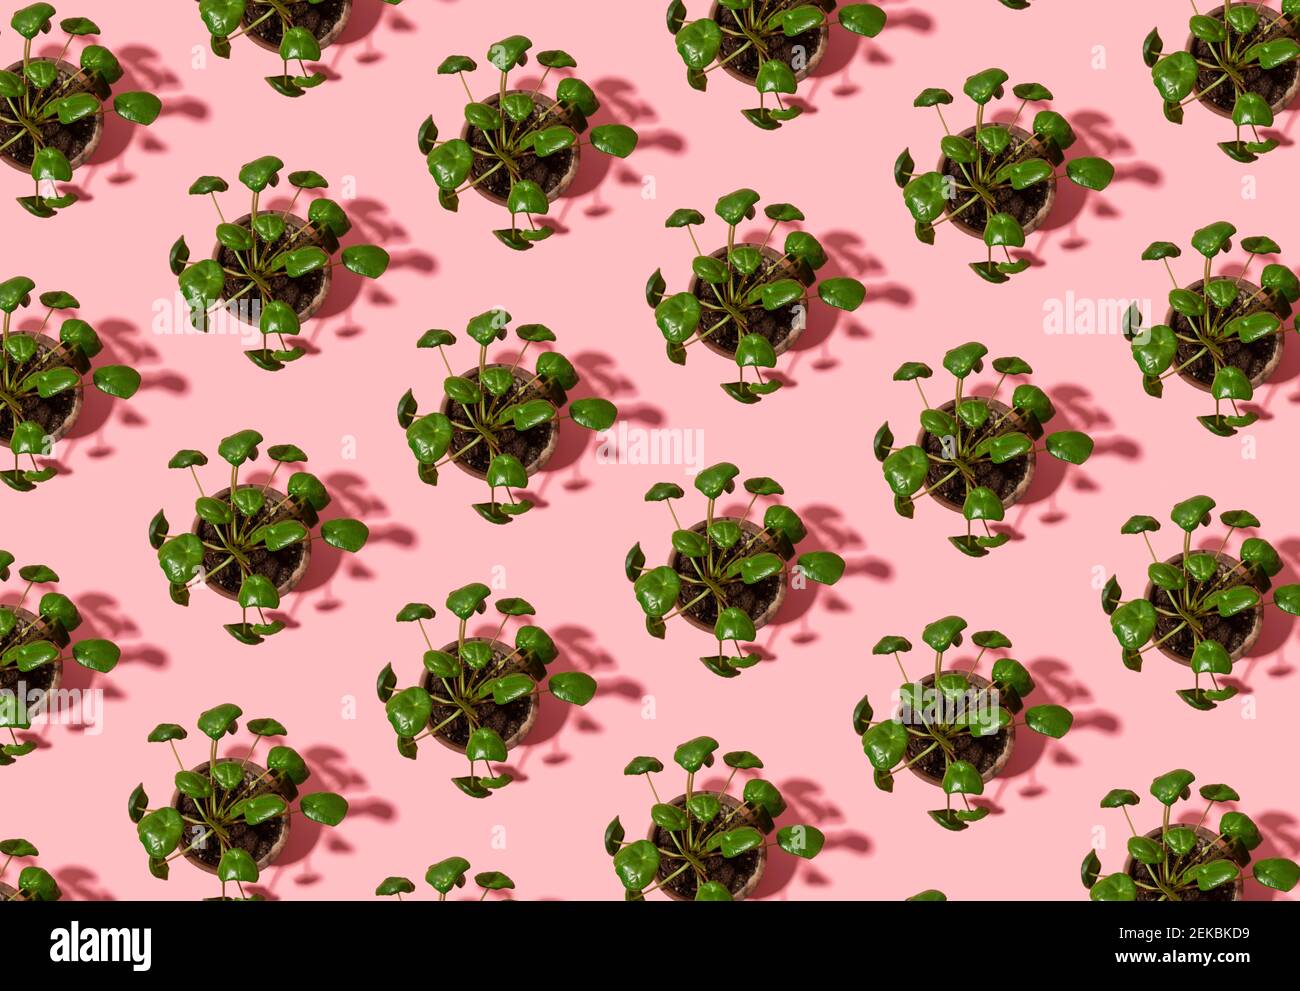 Pattern of potted Chinese money plants (Pilea peperomioides) Stock Photo